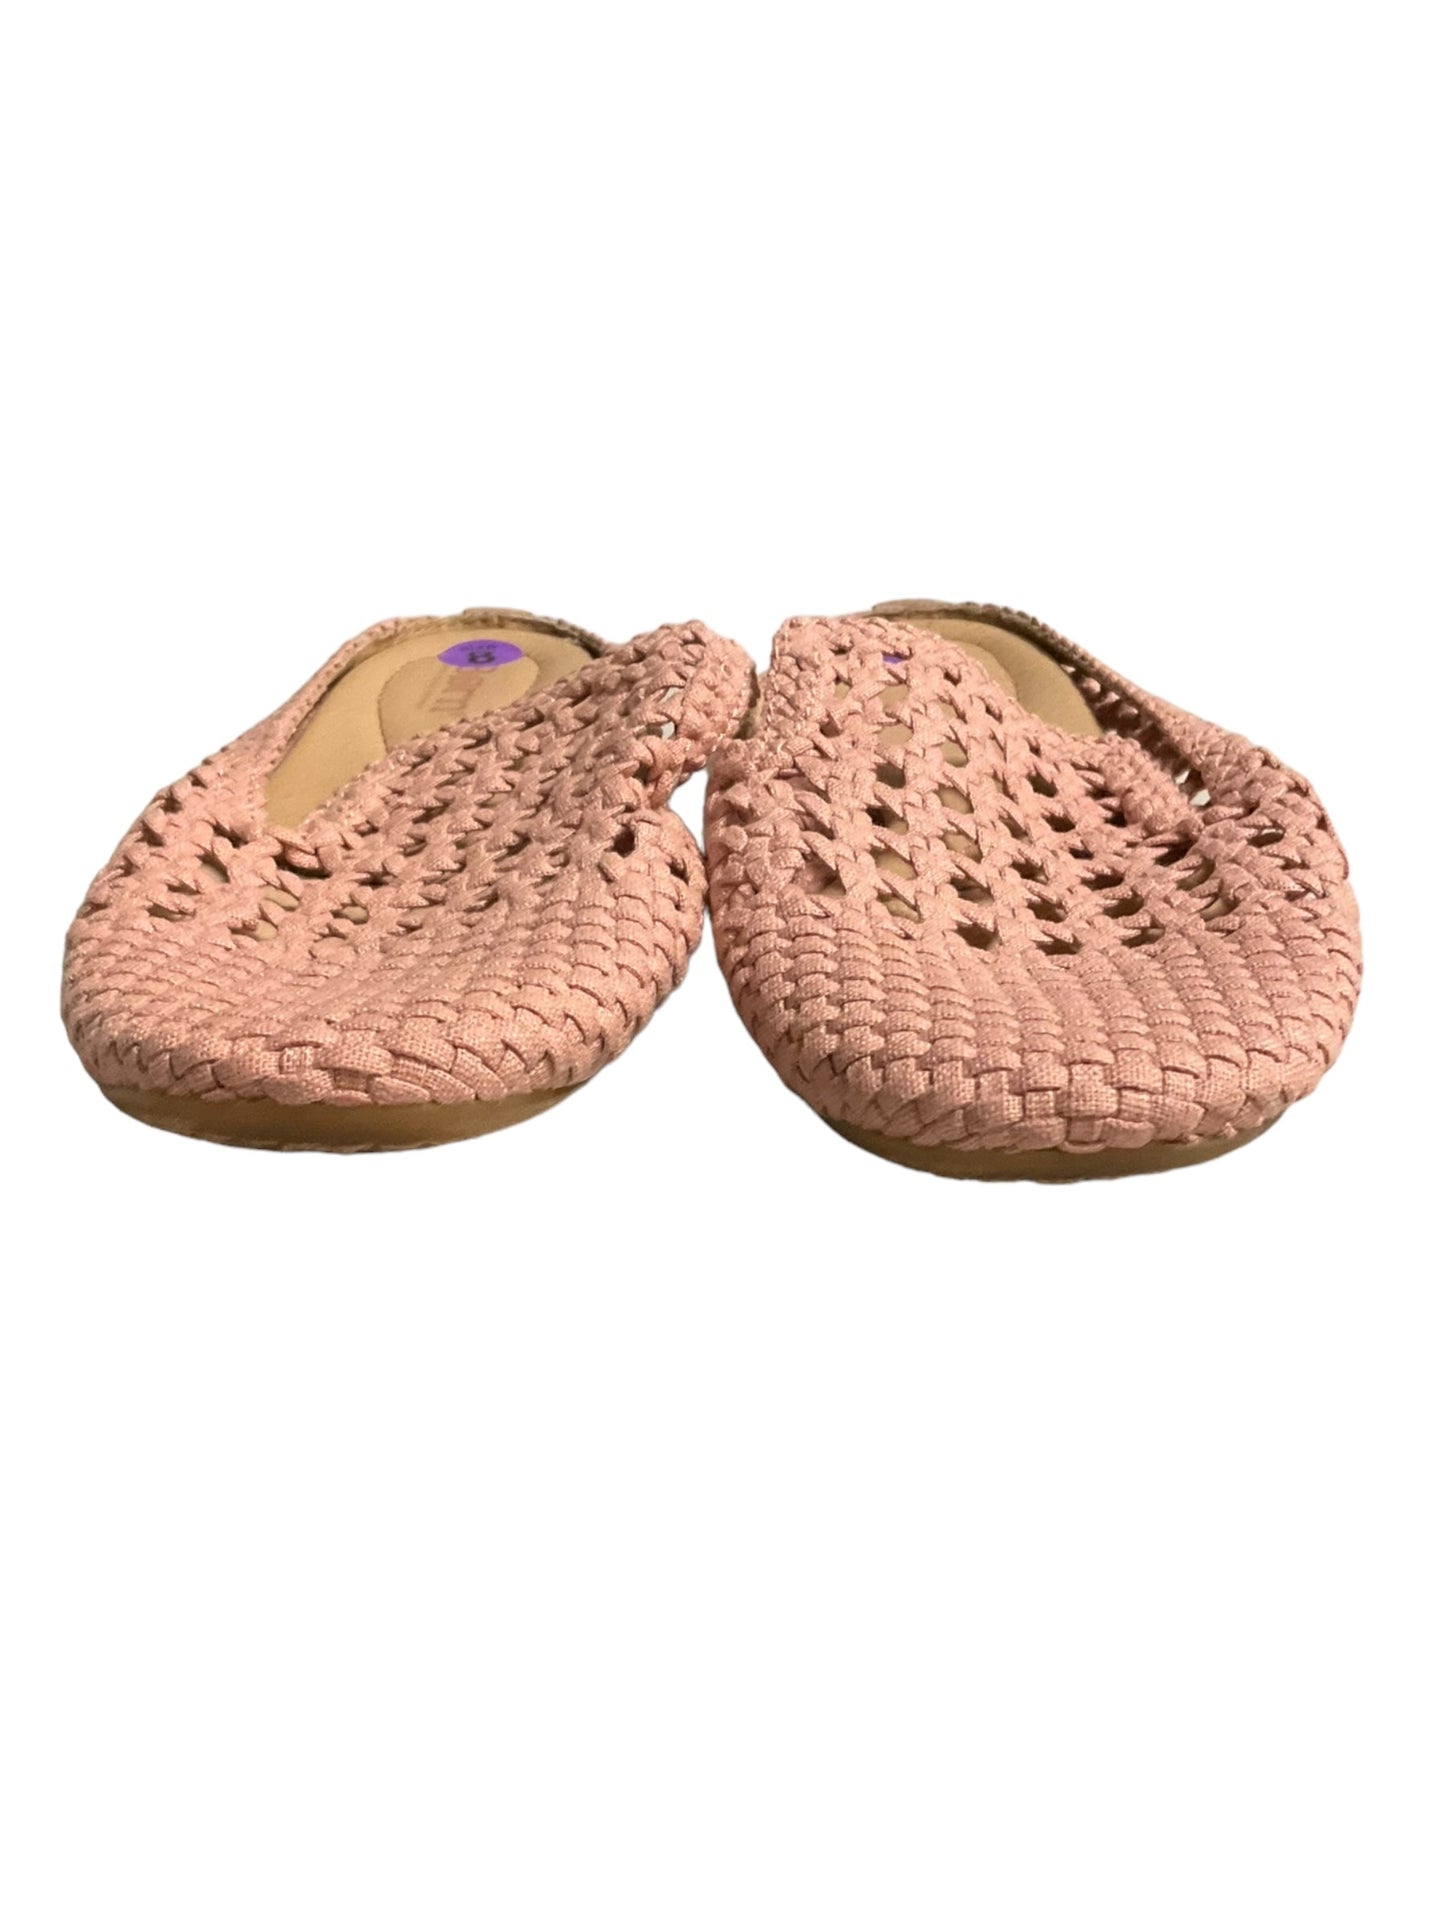 Pink Shoes Flats Born, Size 8